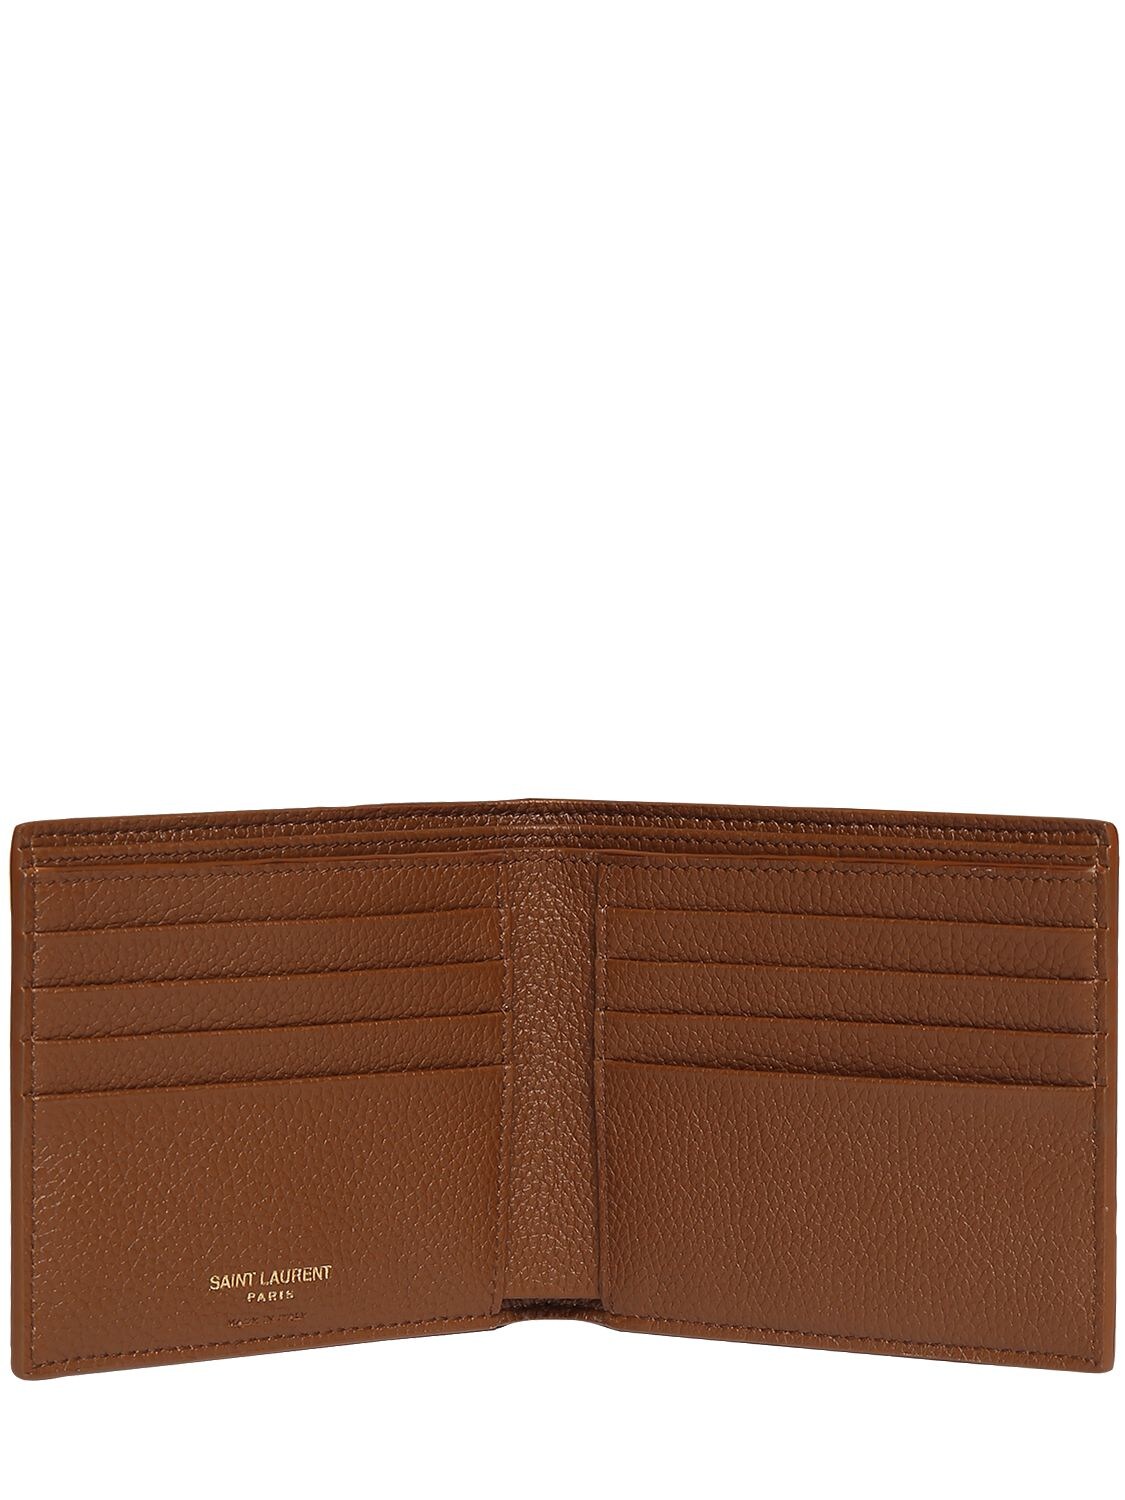 Saint Laurent Monogram Leather Card Holder In Toasted Brown | ModeSens